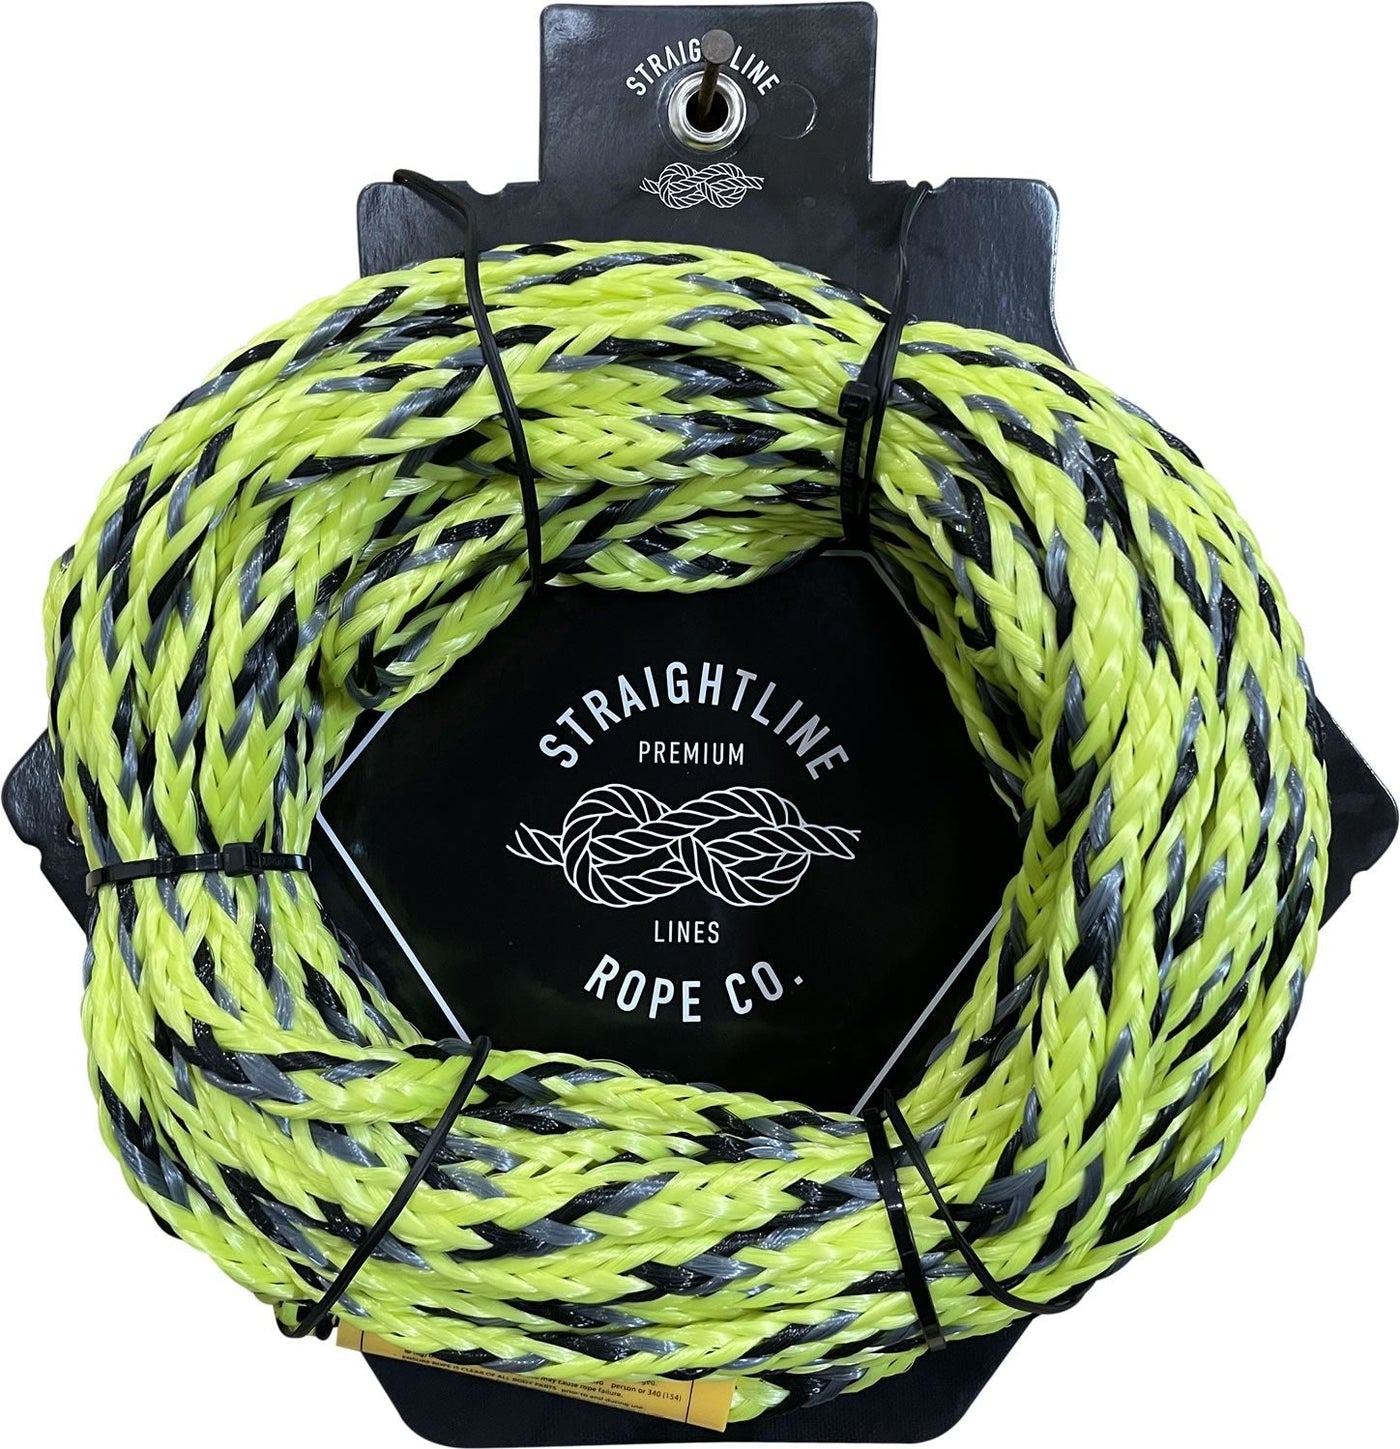 Straightline 2 Person Tube Rope (Yellow)